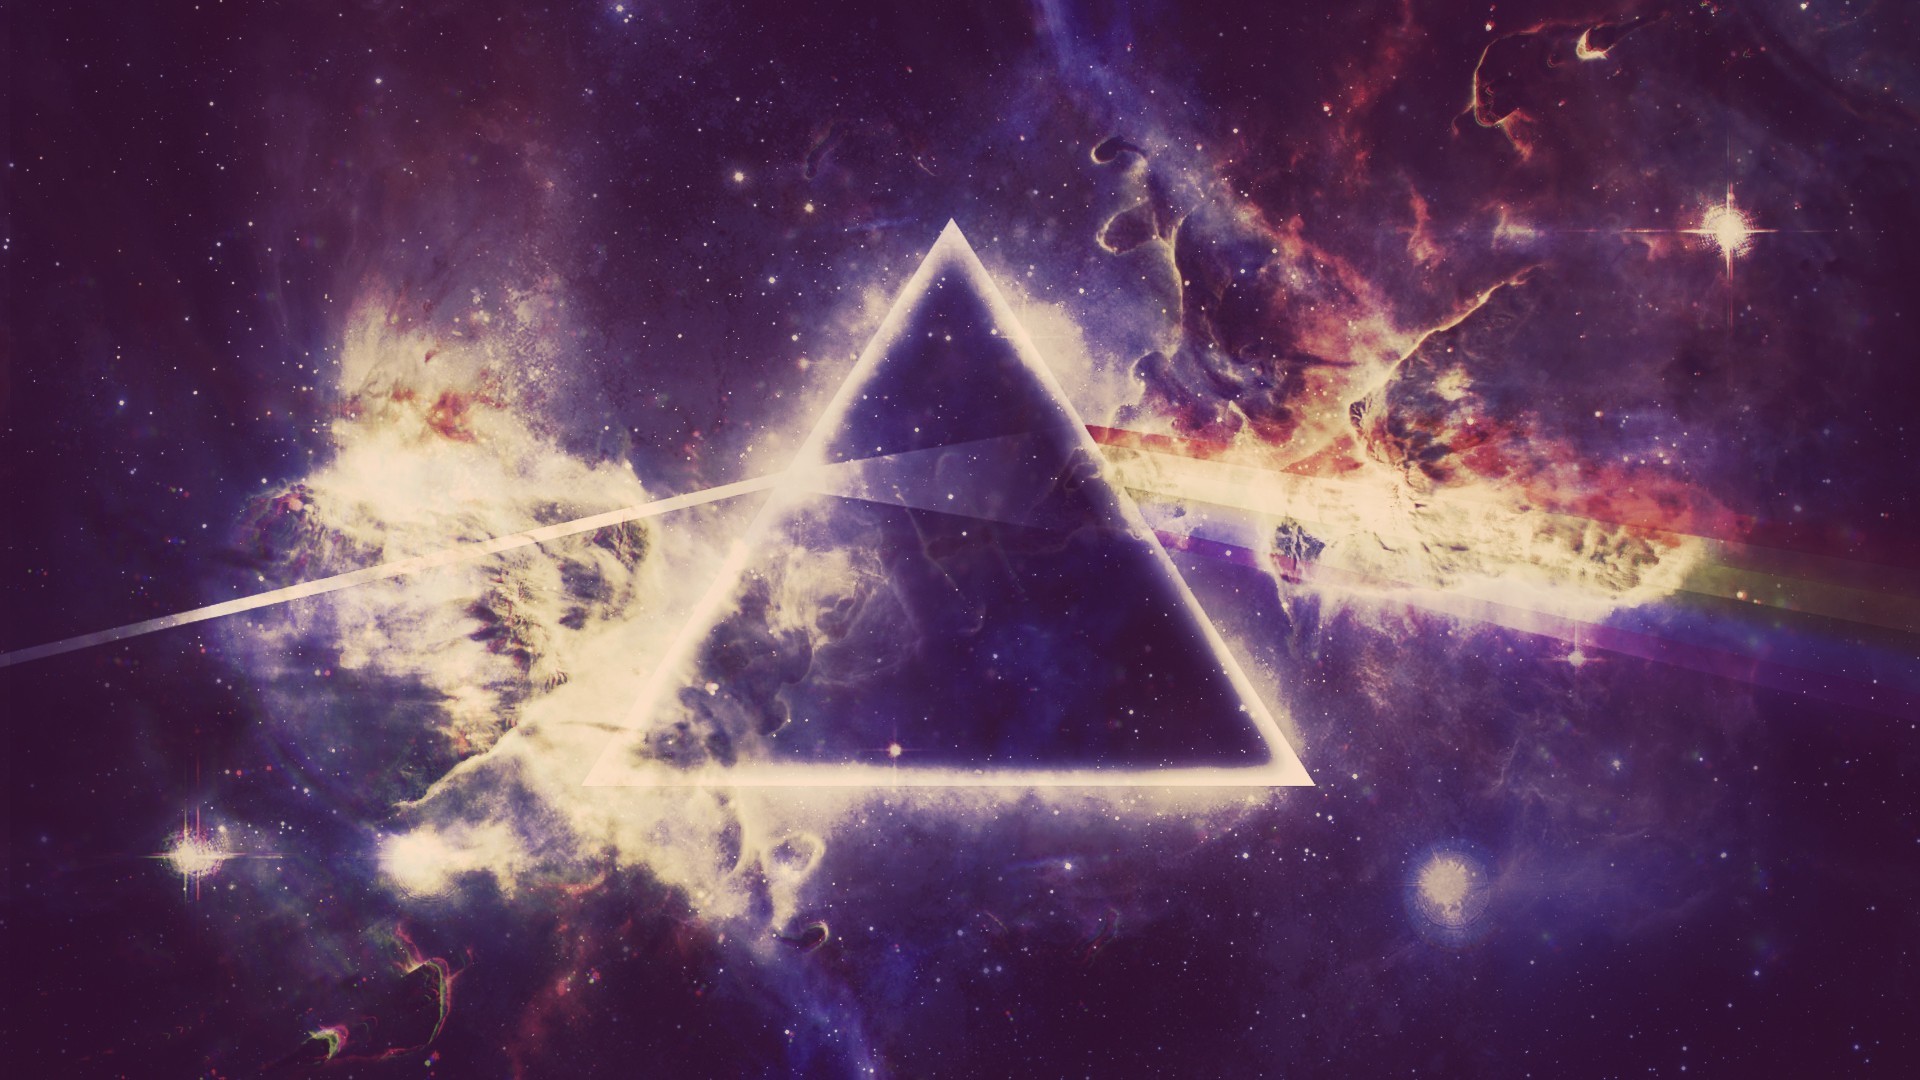 1920x1080 The Dark Side of the Moon HD Wallpaper 